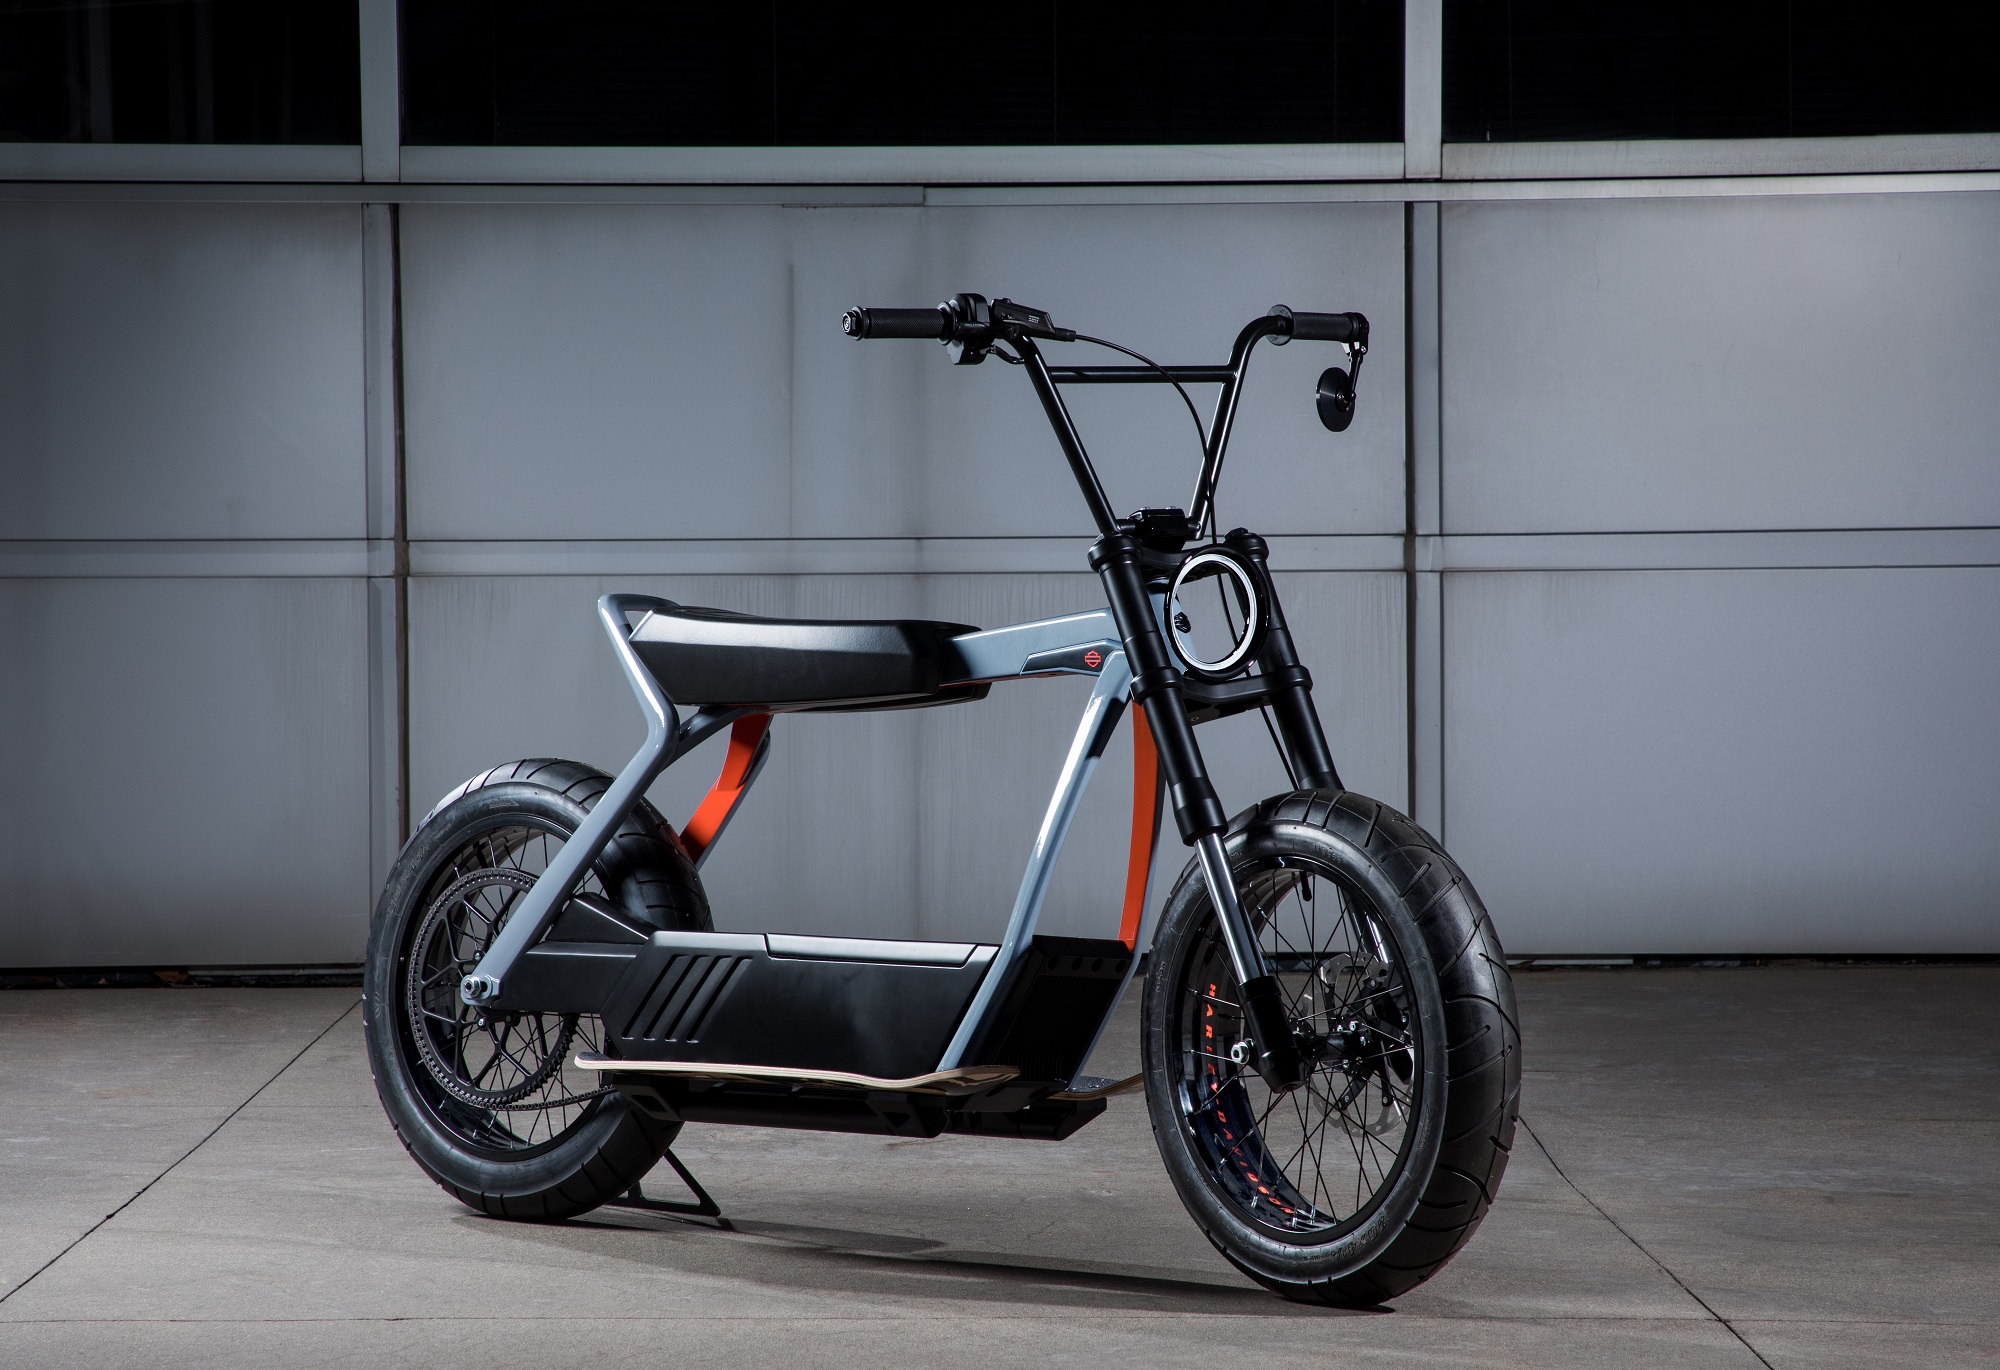 Harley-Davidson electric scooter concept